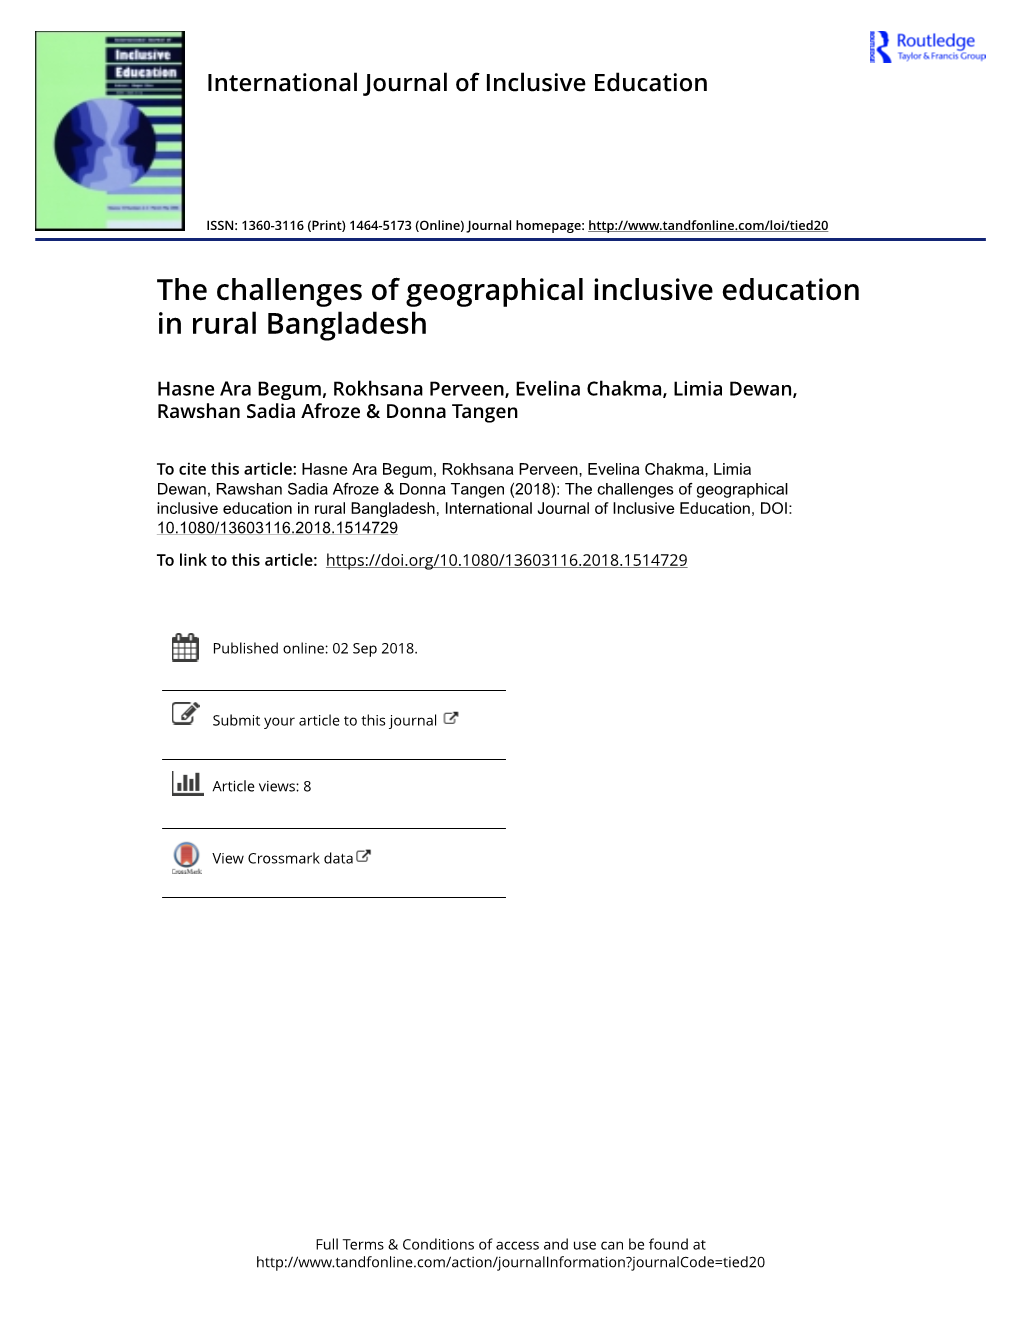 The Challenges of Geographical Inclusive Education in Rural Bangladesh